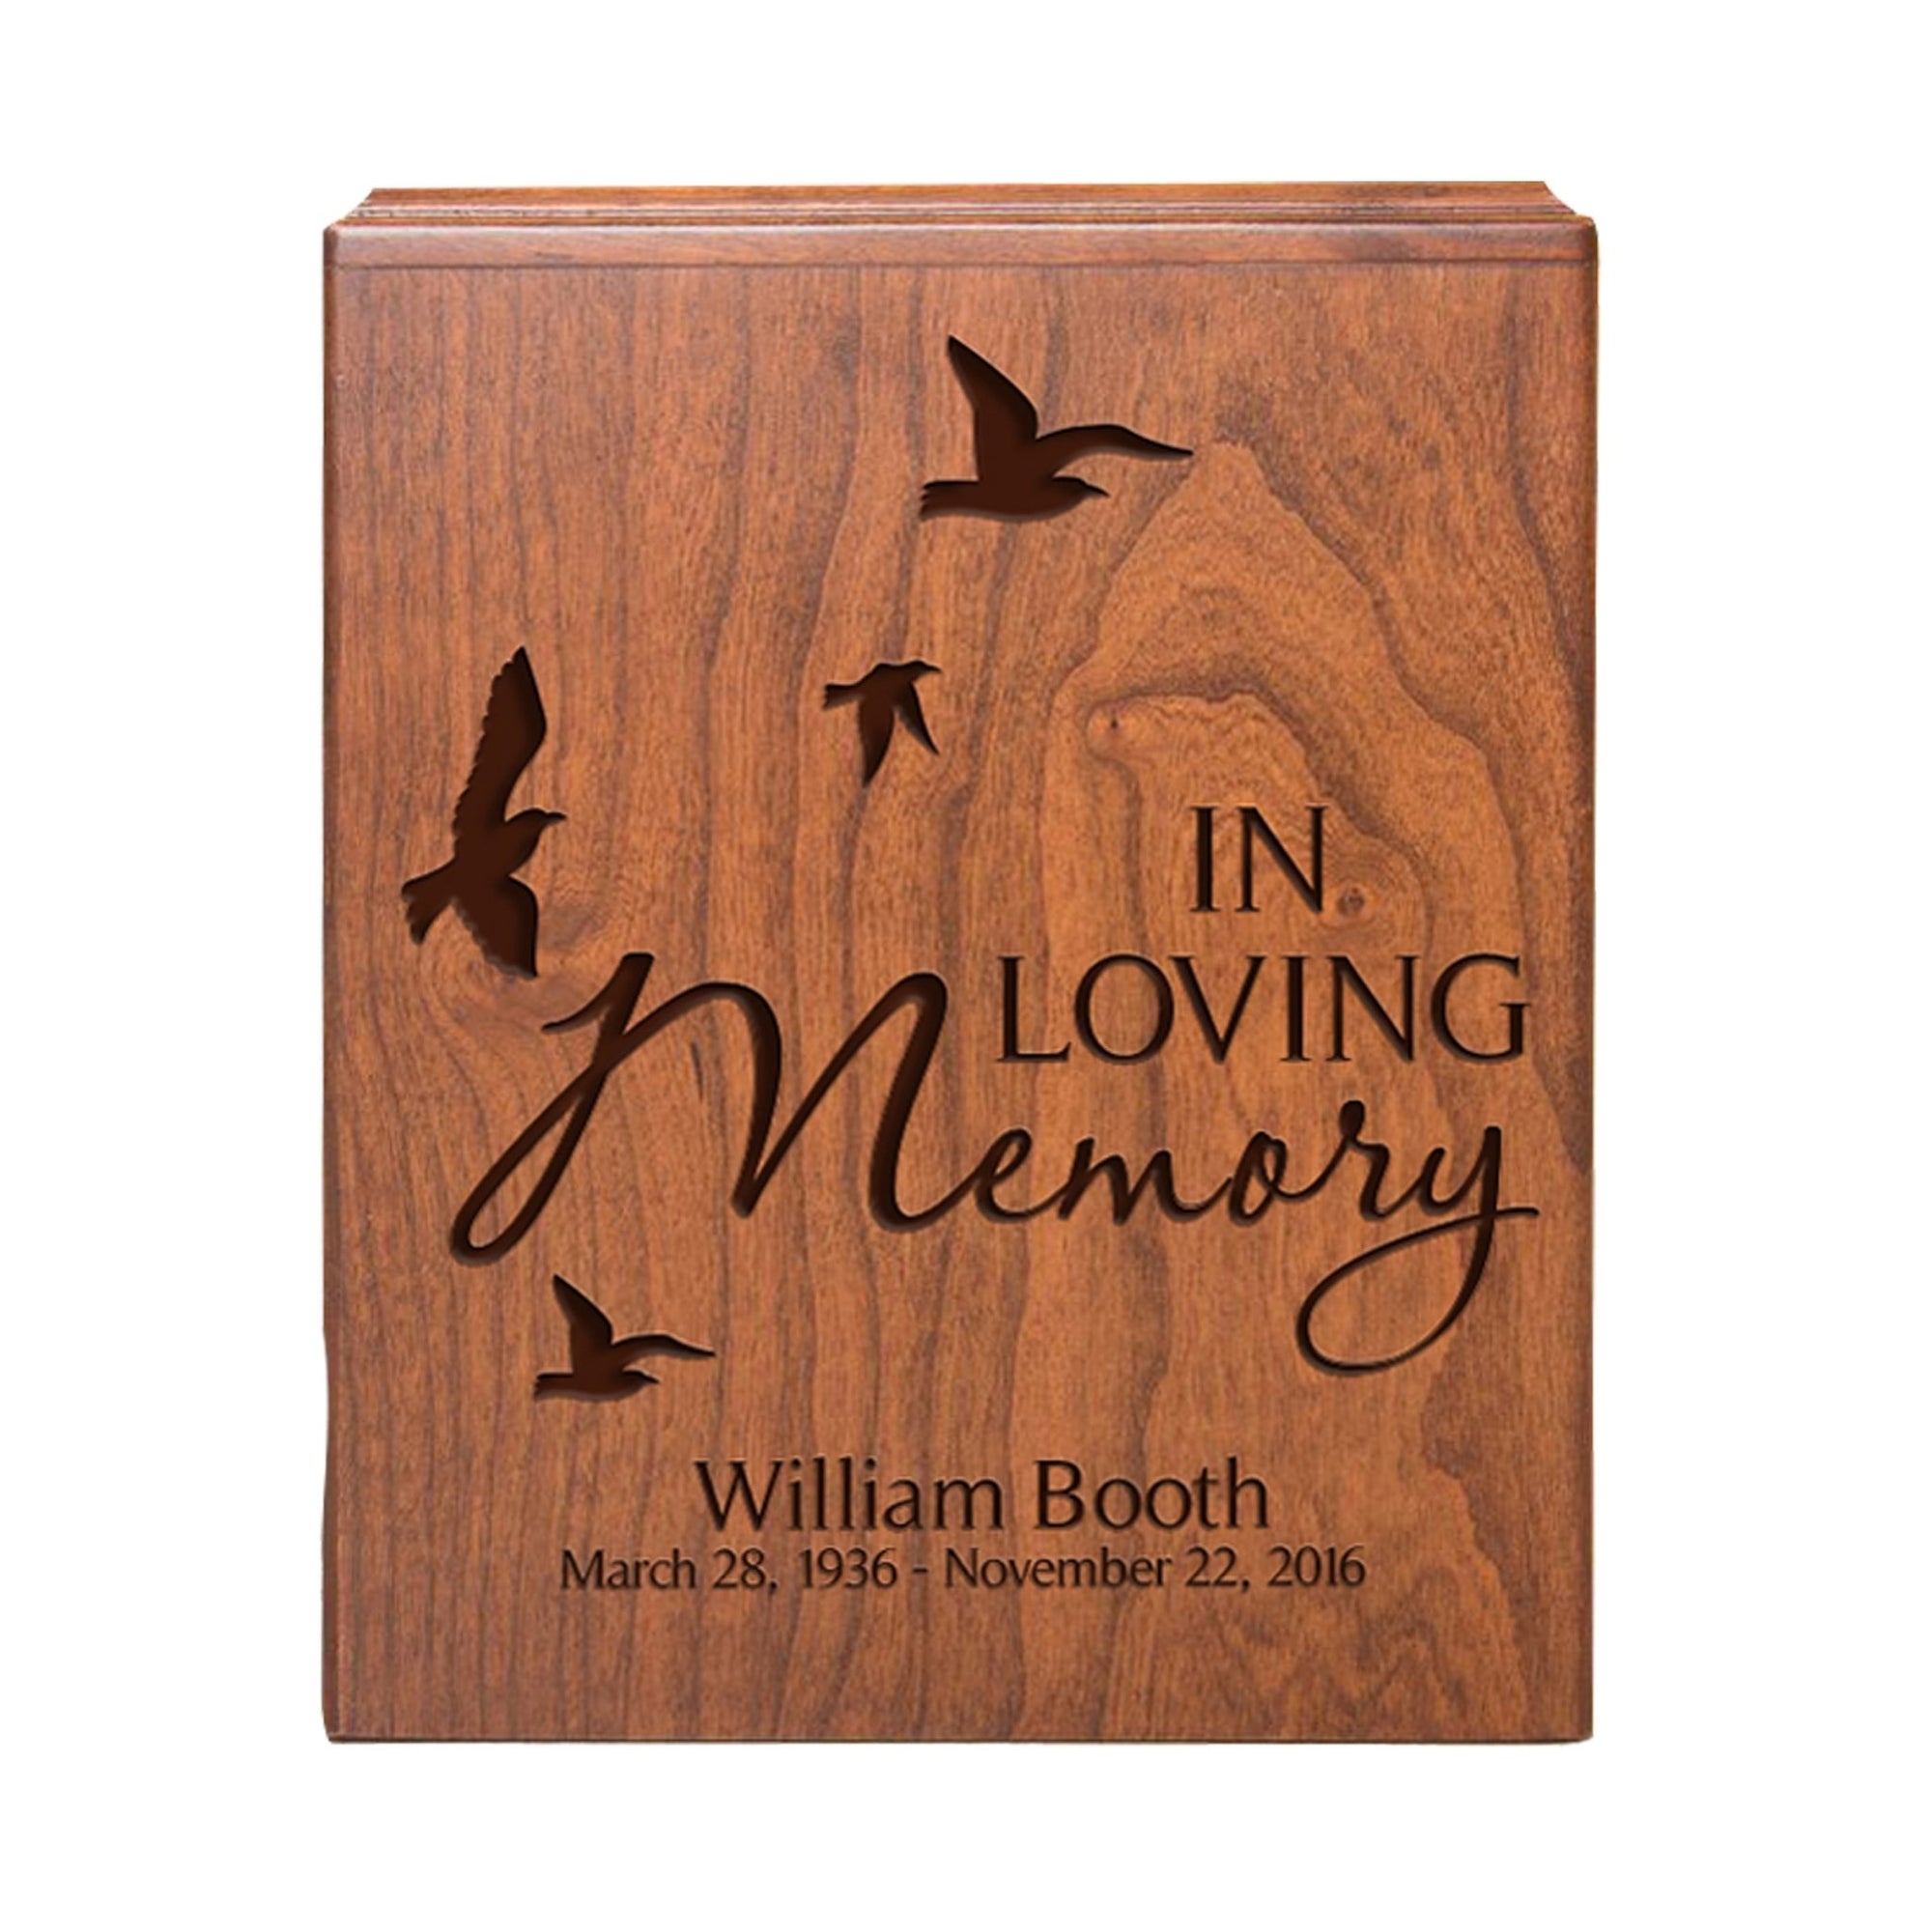 Custom Engraved Memorial Urn Box for Human Ashes holds 280 cu in In Loving Memory Birds - LifeSong Milestones